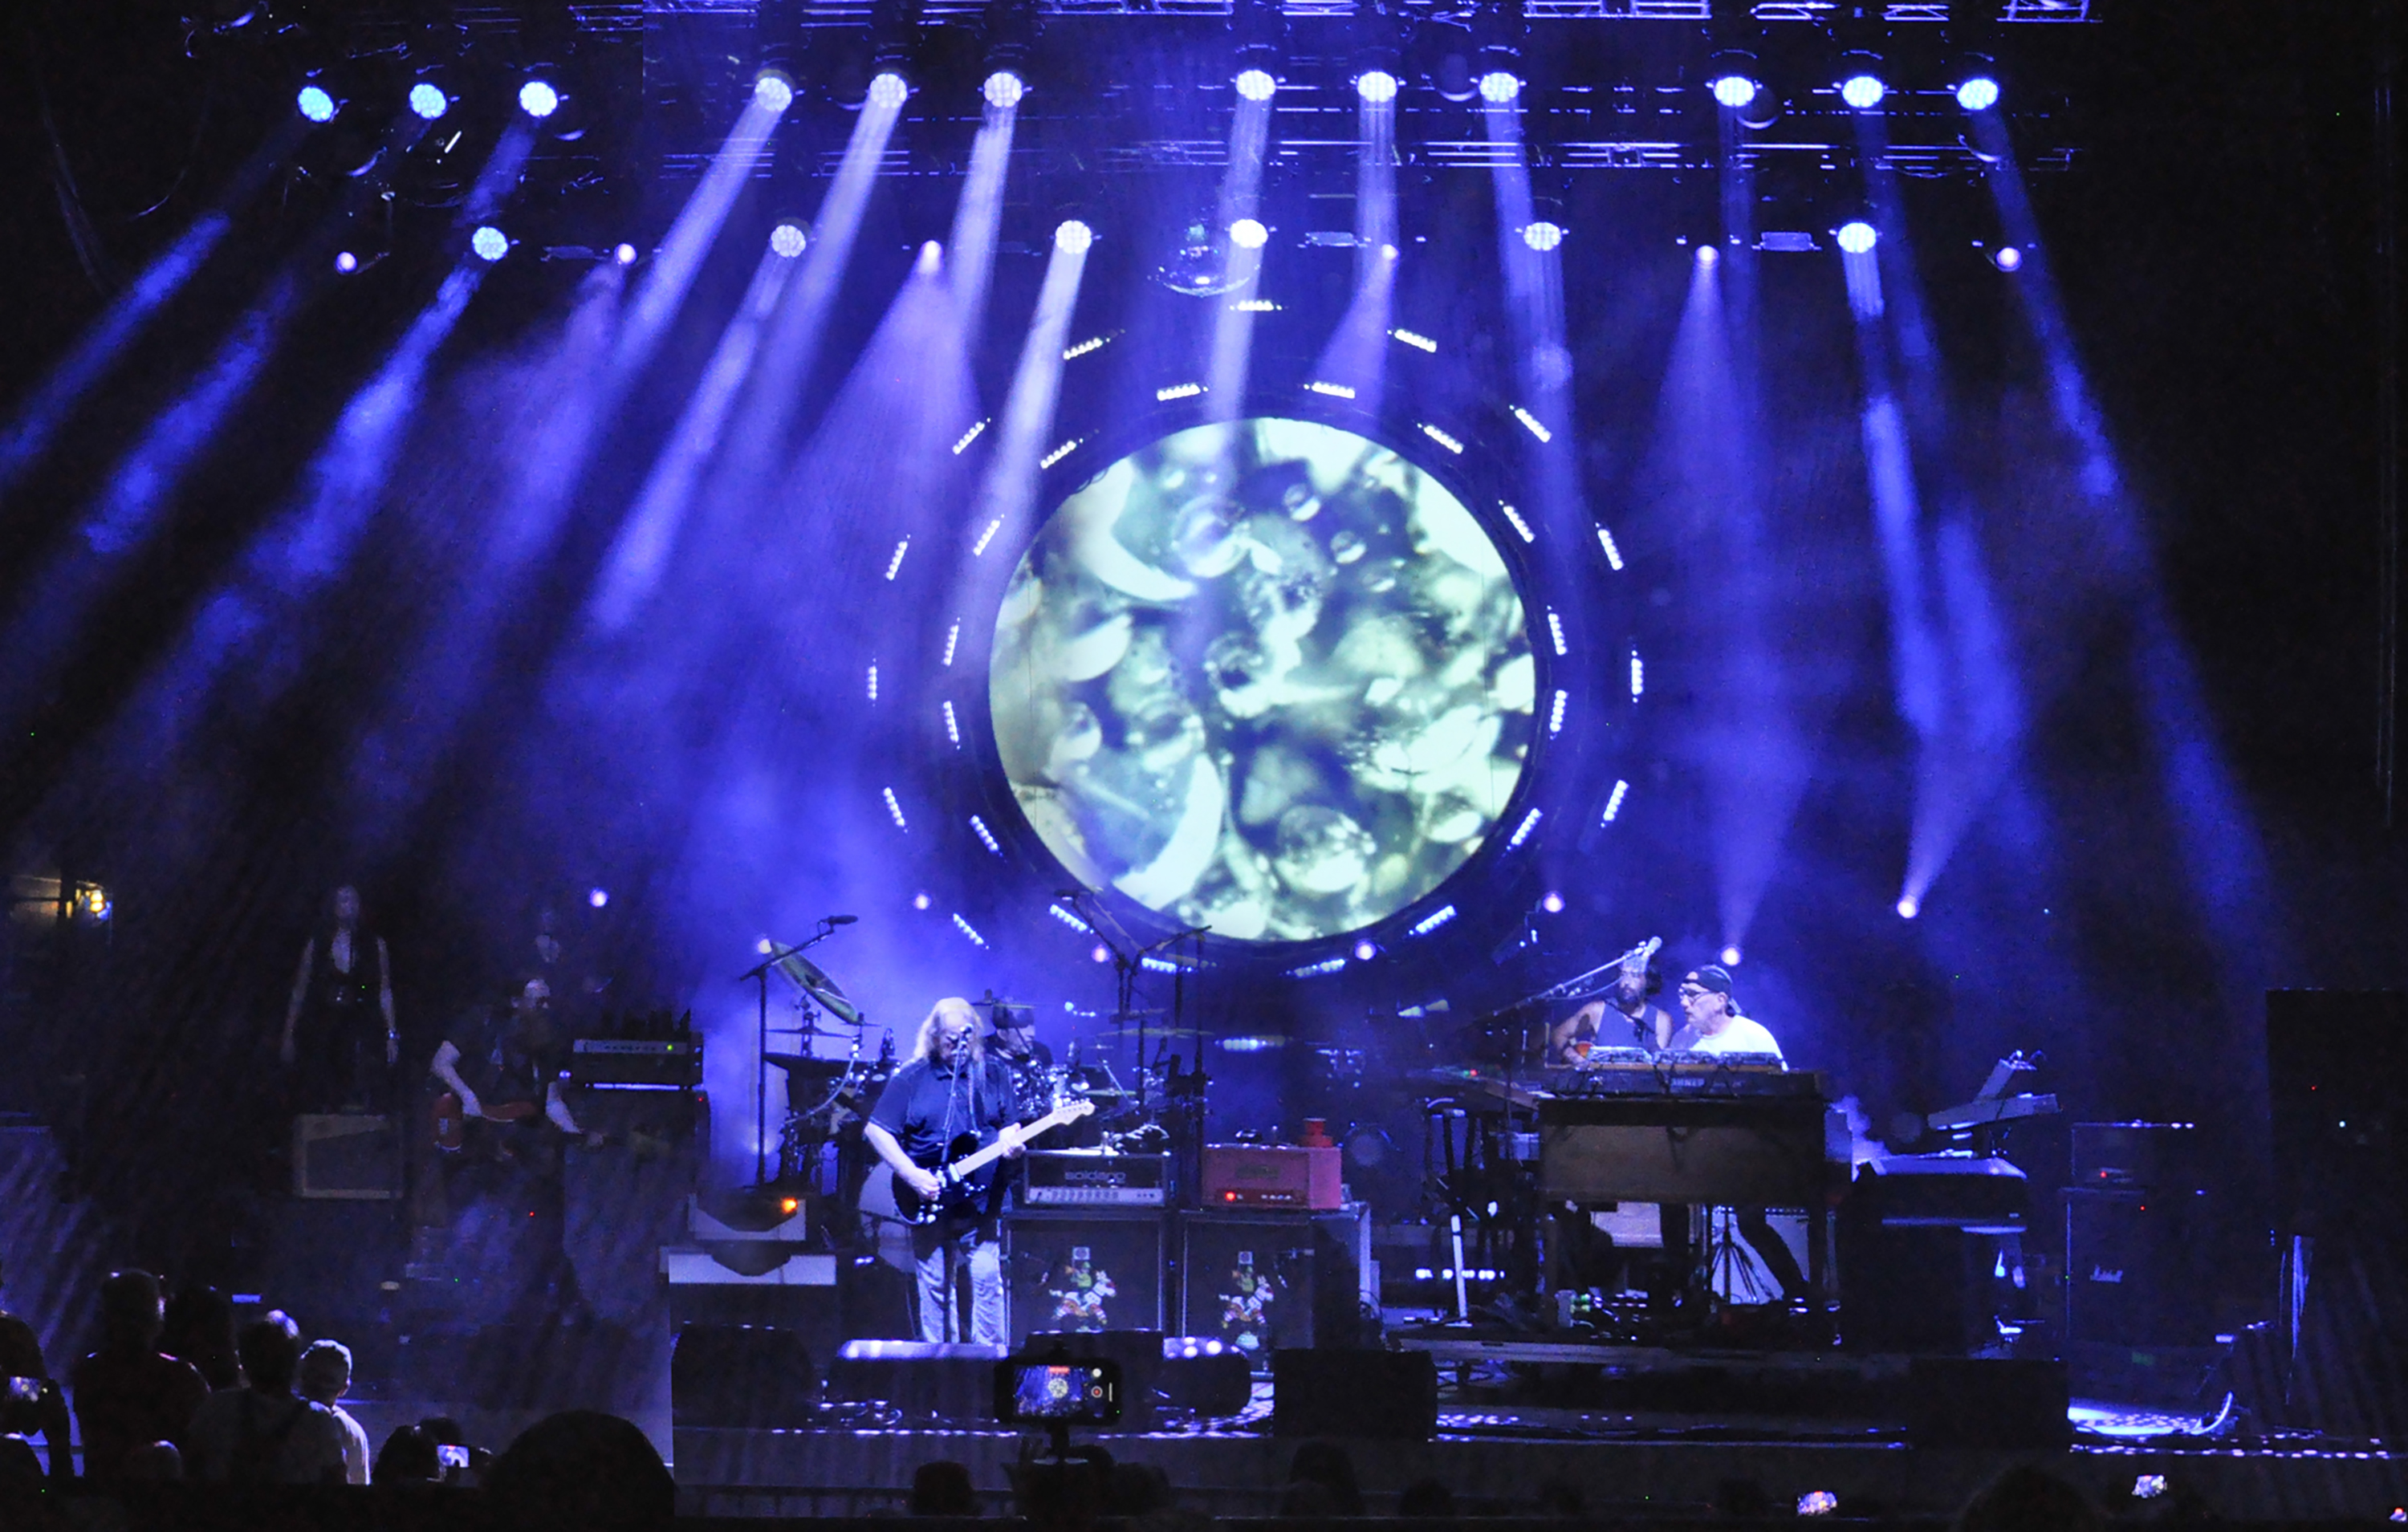 Gov't Mule stage lighting and projections | Columbus, Ohio